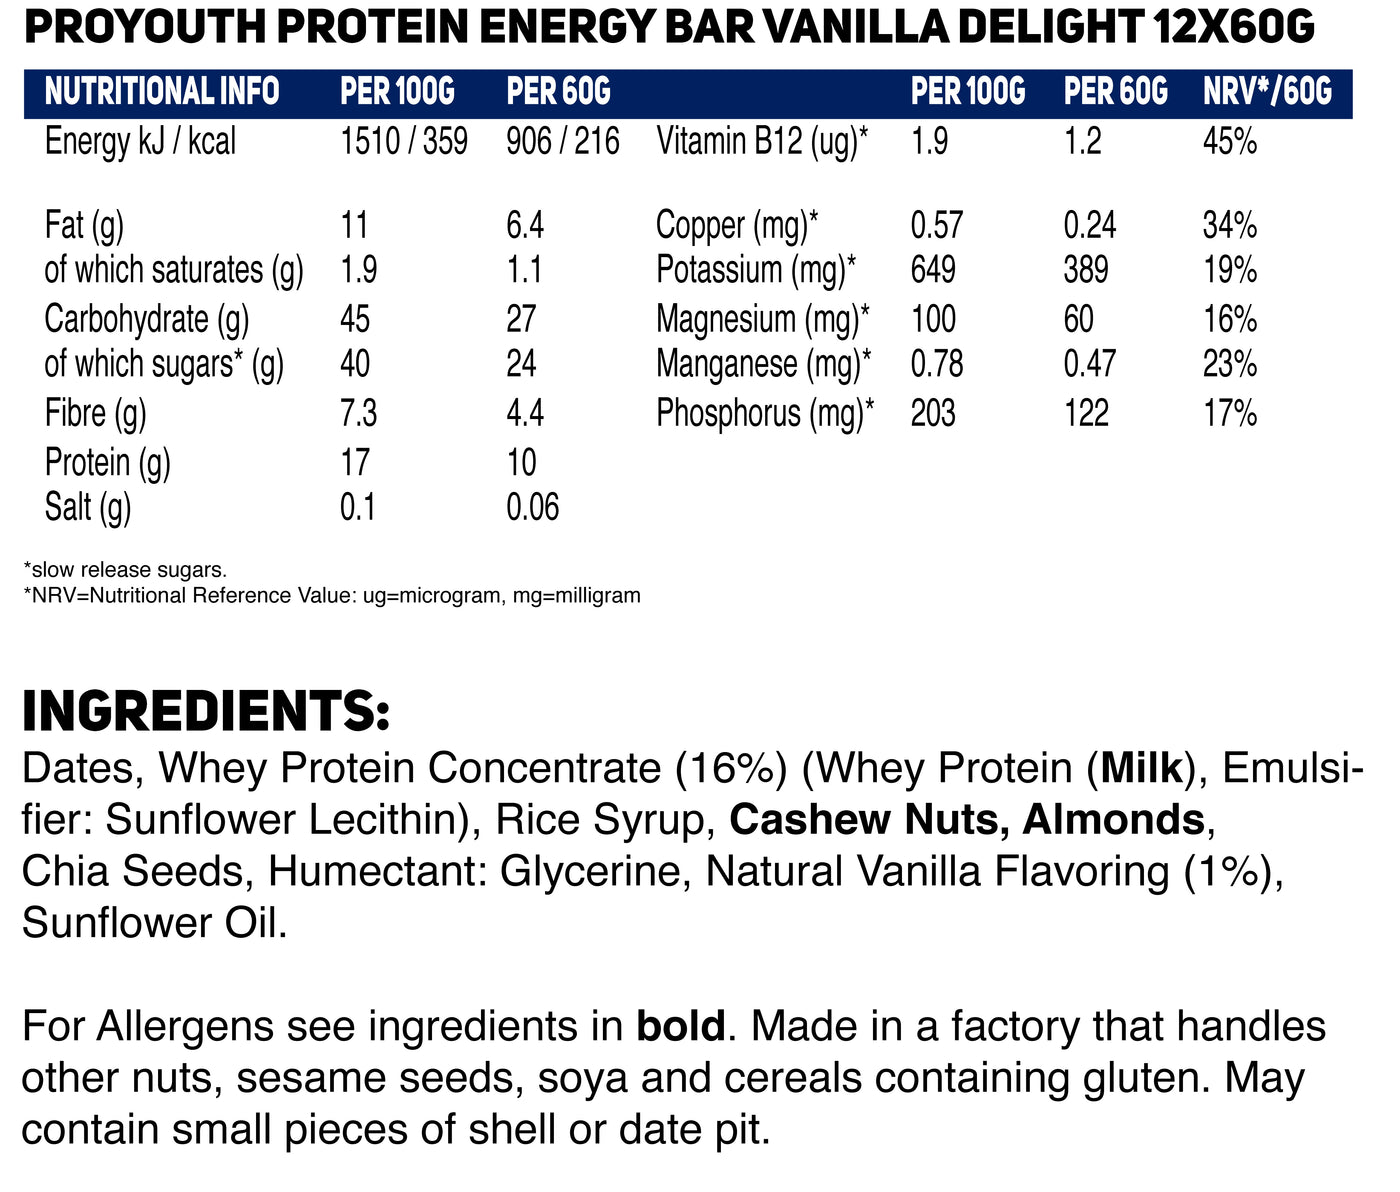 ProYouth Natural Protein Energy MIX BOX - 12 x 60g